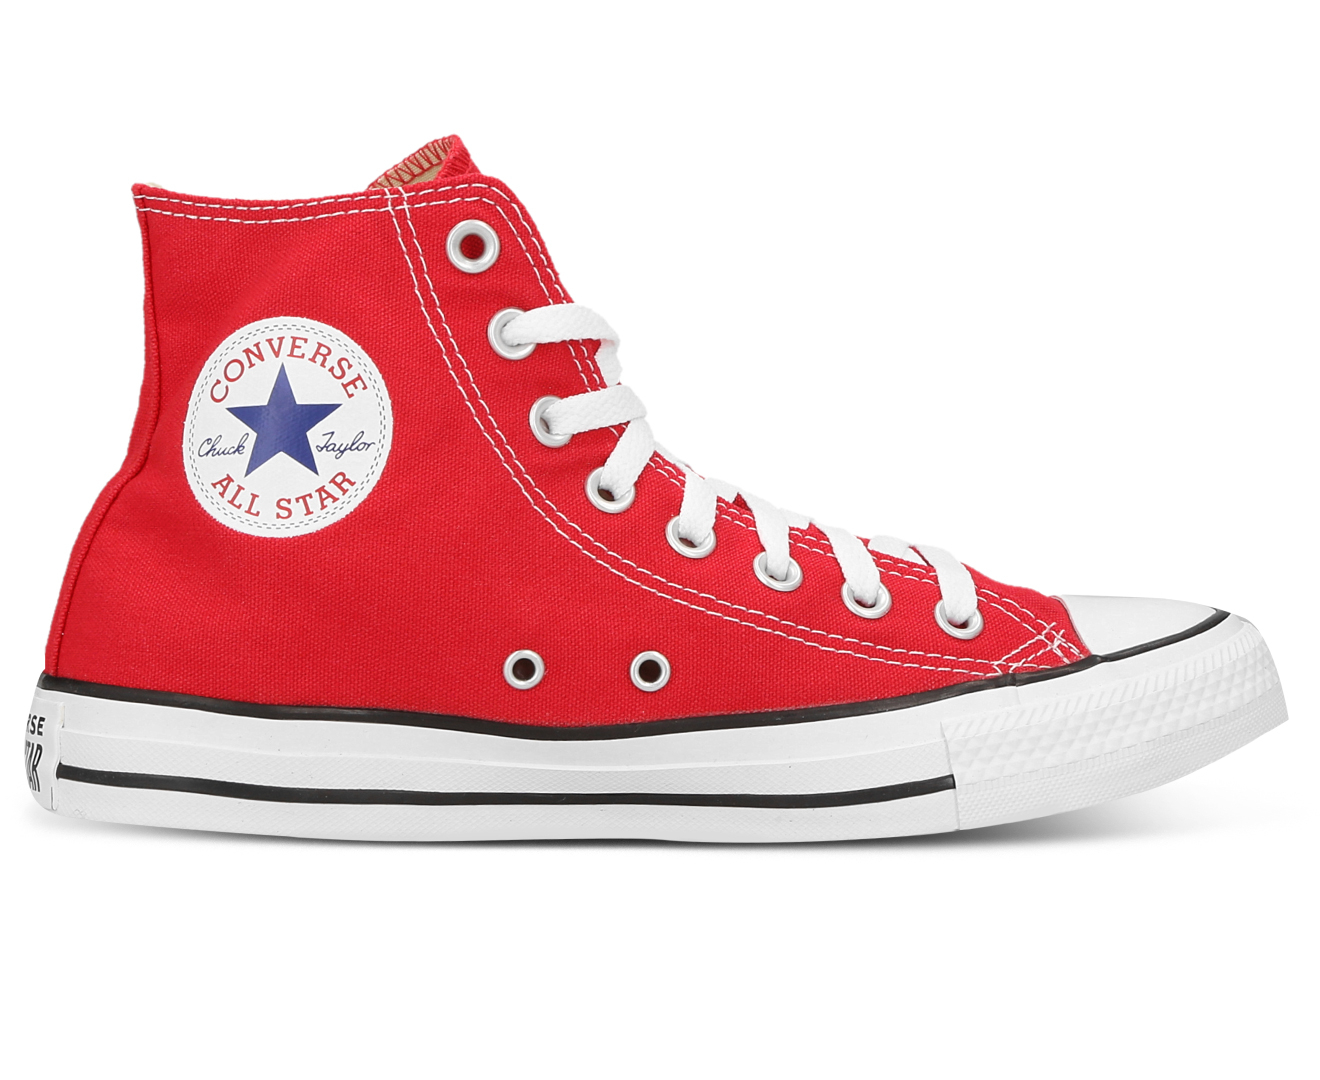 Converse Unisex Chuck Taylor All Star High Top Sneakers Red Catch